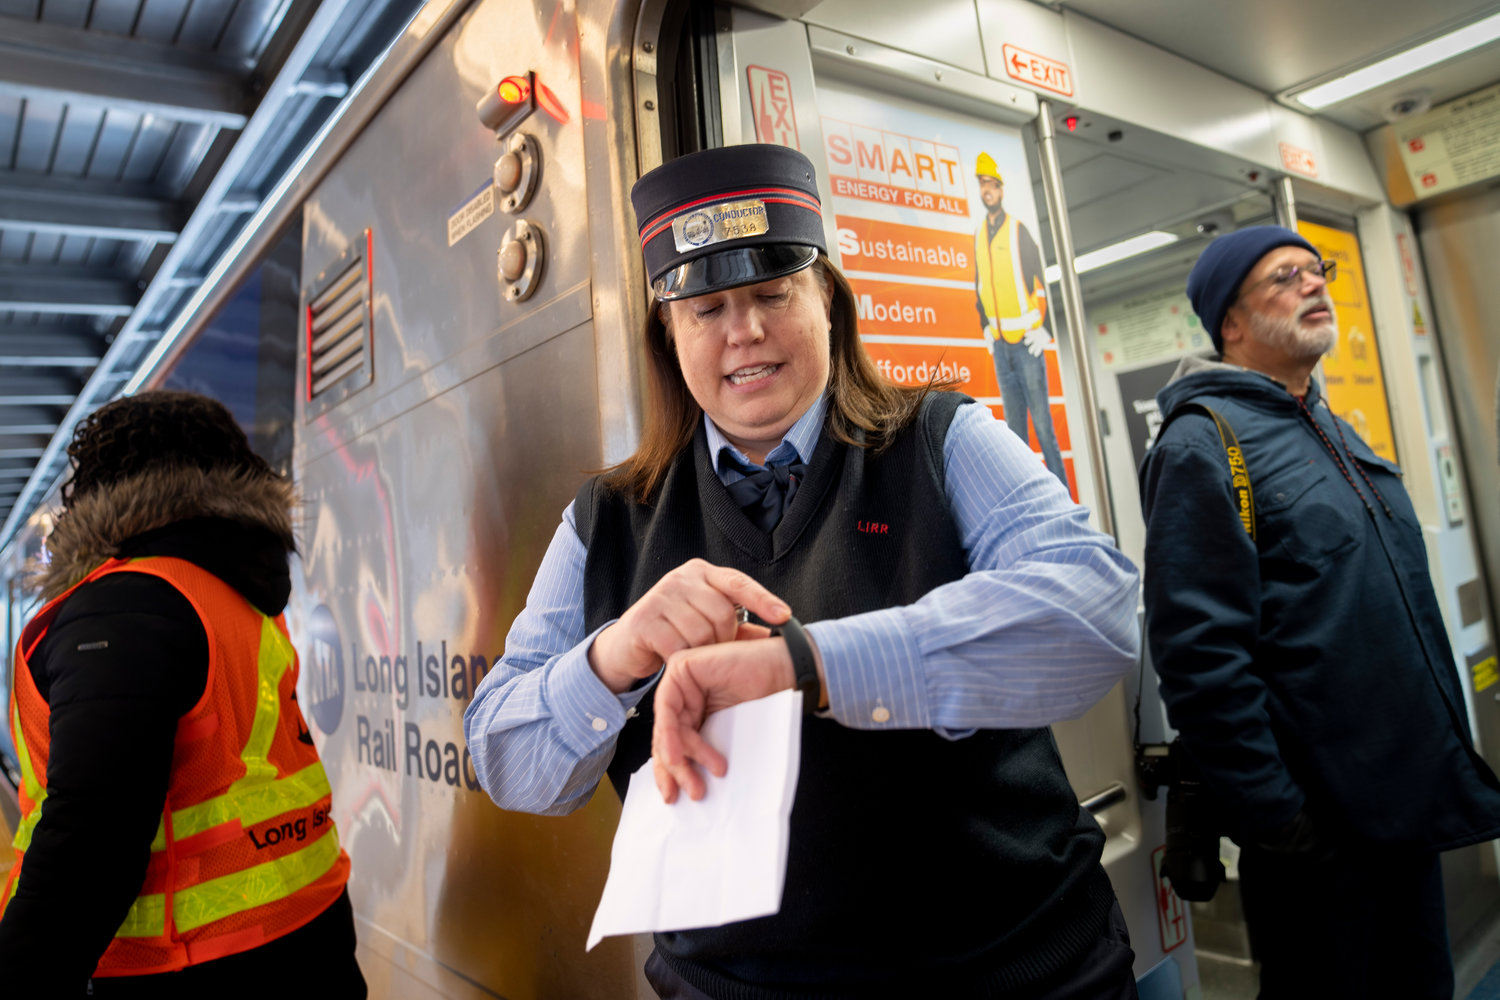 Kelly Curry, a 23-year veteran of the MTA, checks her watch as her Long Island Rail Road train departs for its inaugural trip from Jamaica station towards Manhattan, Wednesday, Jan. 25, 2023, in the Queens borough of New York. After years of delays and massive cost overruns, one of the world's most expensive railway projects has begun shuttling its first passengers between Long Island to the latest addition to New York City's iconic Grand Central Terminal. (AP Photo/John Minchillo)